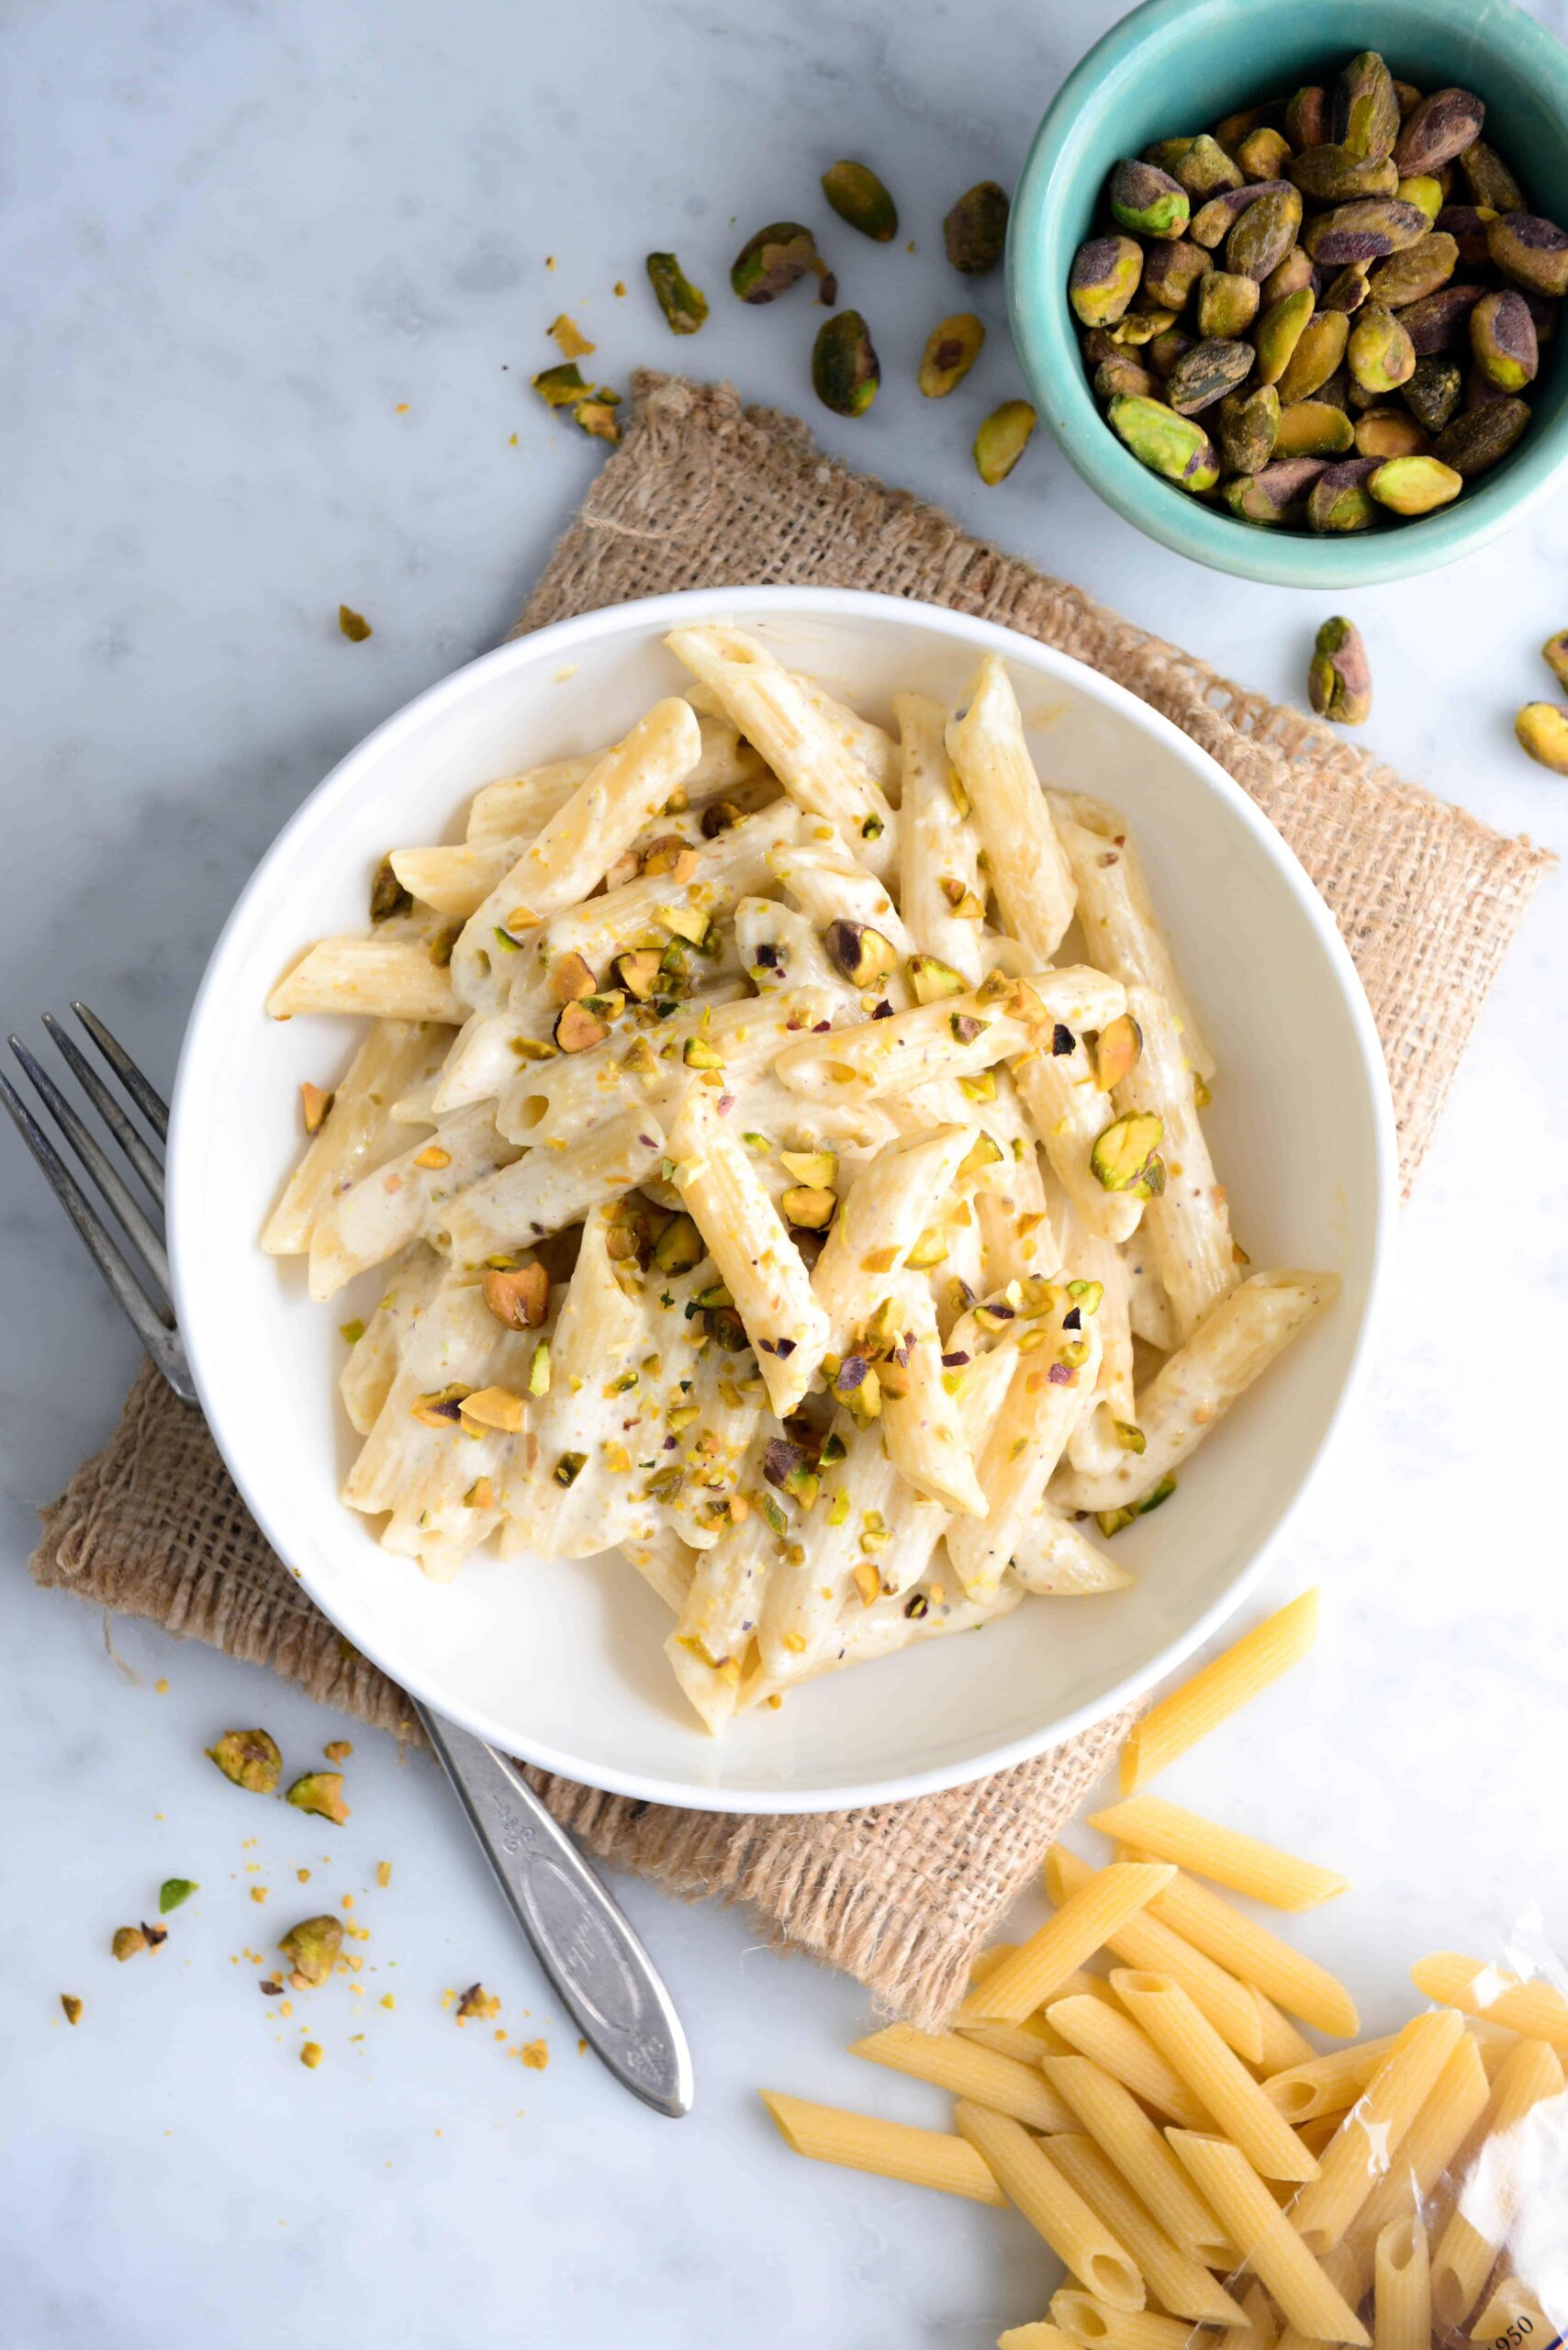  Nutty, creamy and dreamy - this pasta dish has it all!